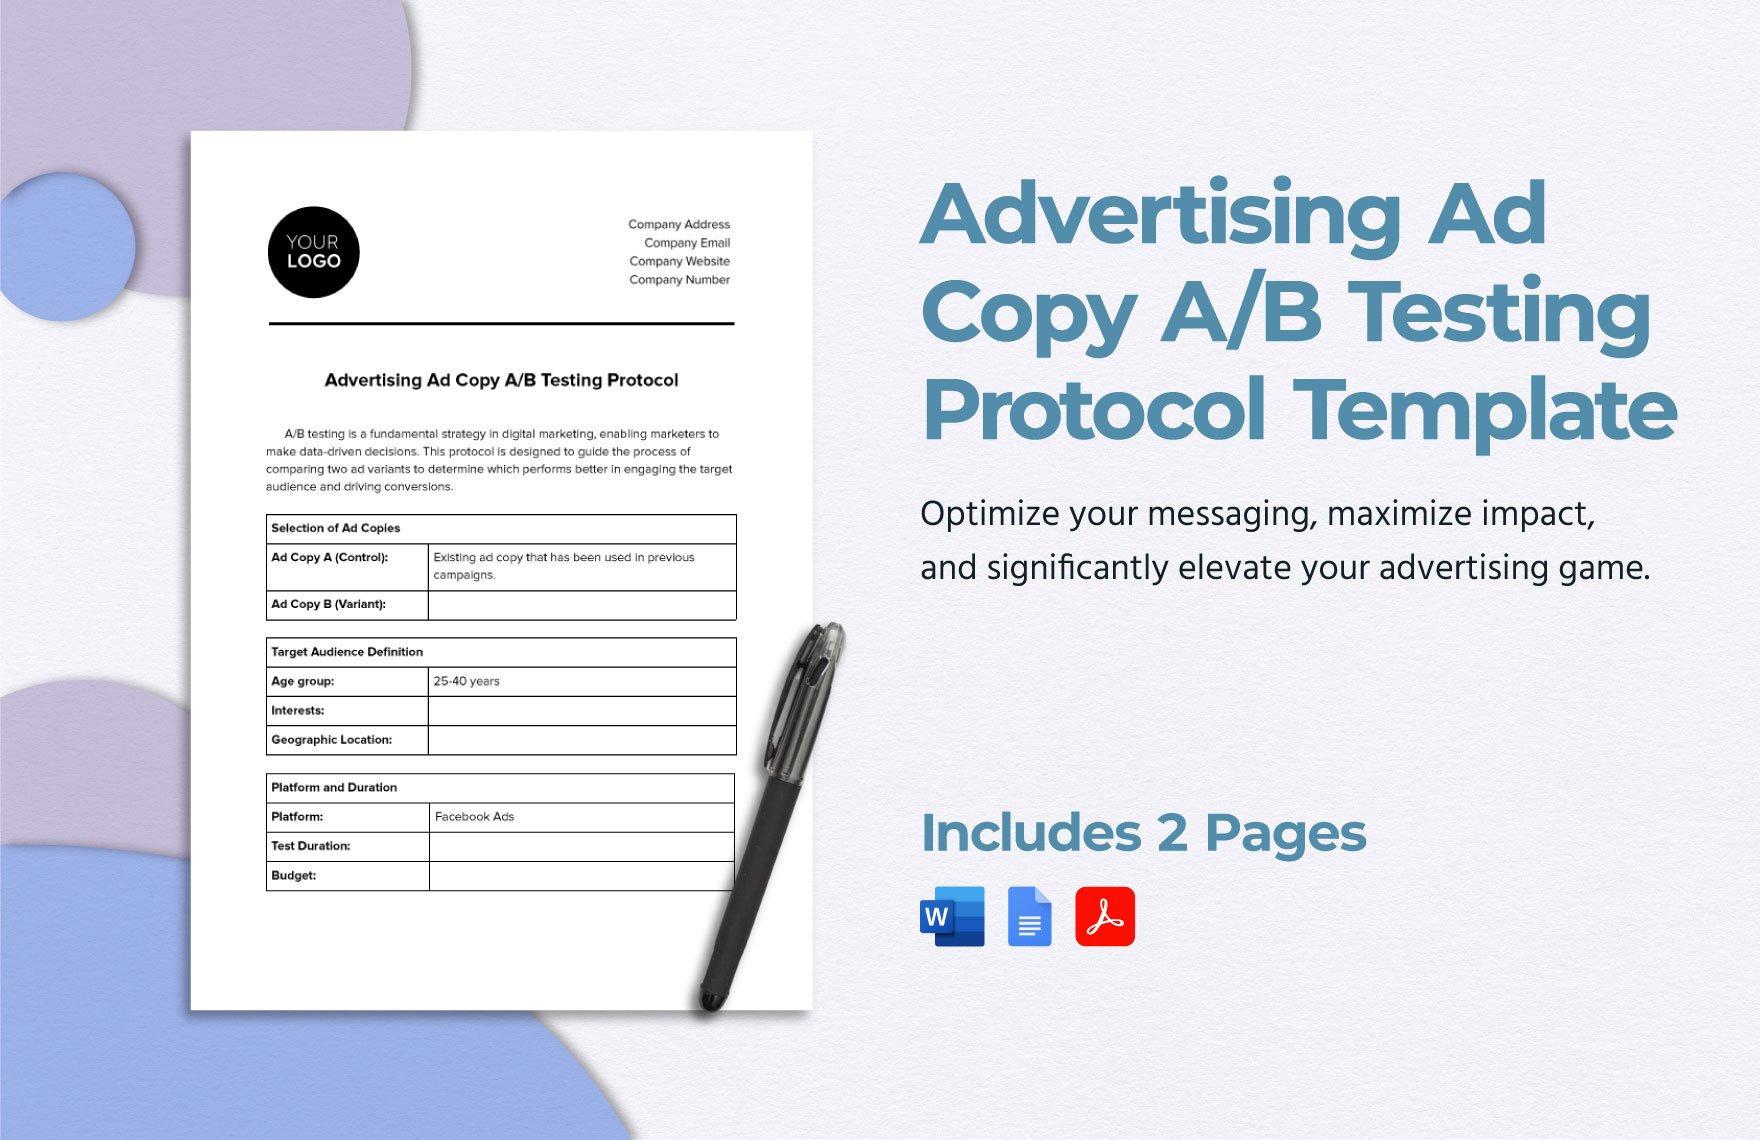 Advertising Ad Copy A/B Testing Protocol Template